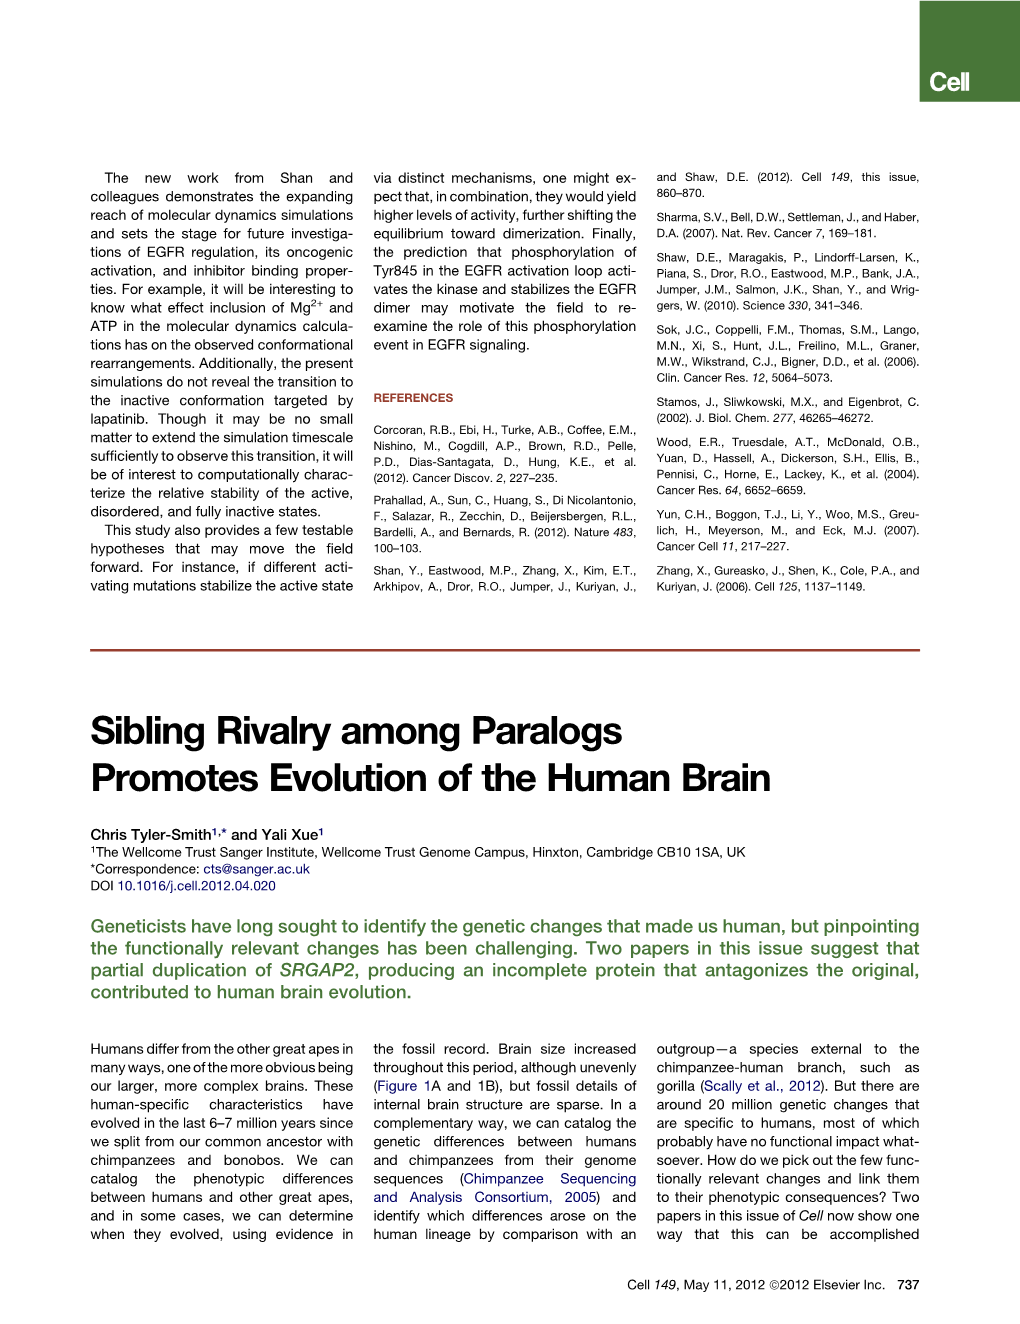 Sibling Rivalry Among Paralogs Promotes Evolution of the Human Brain